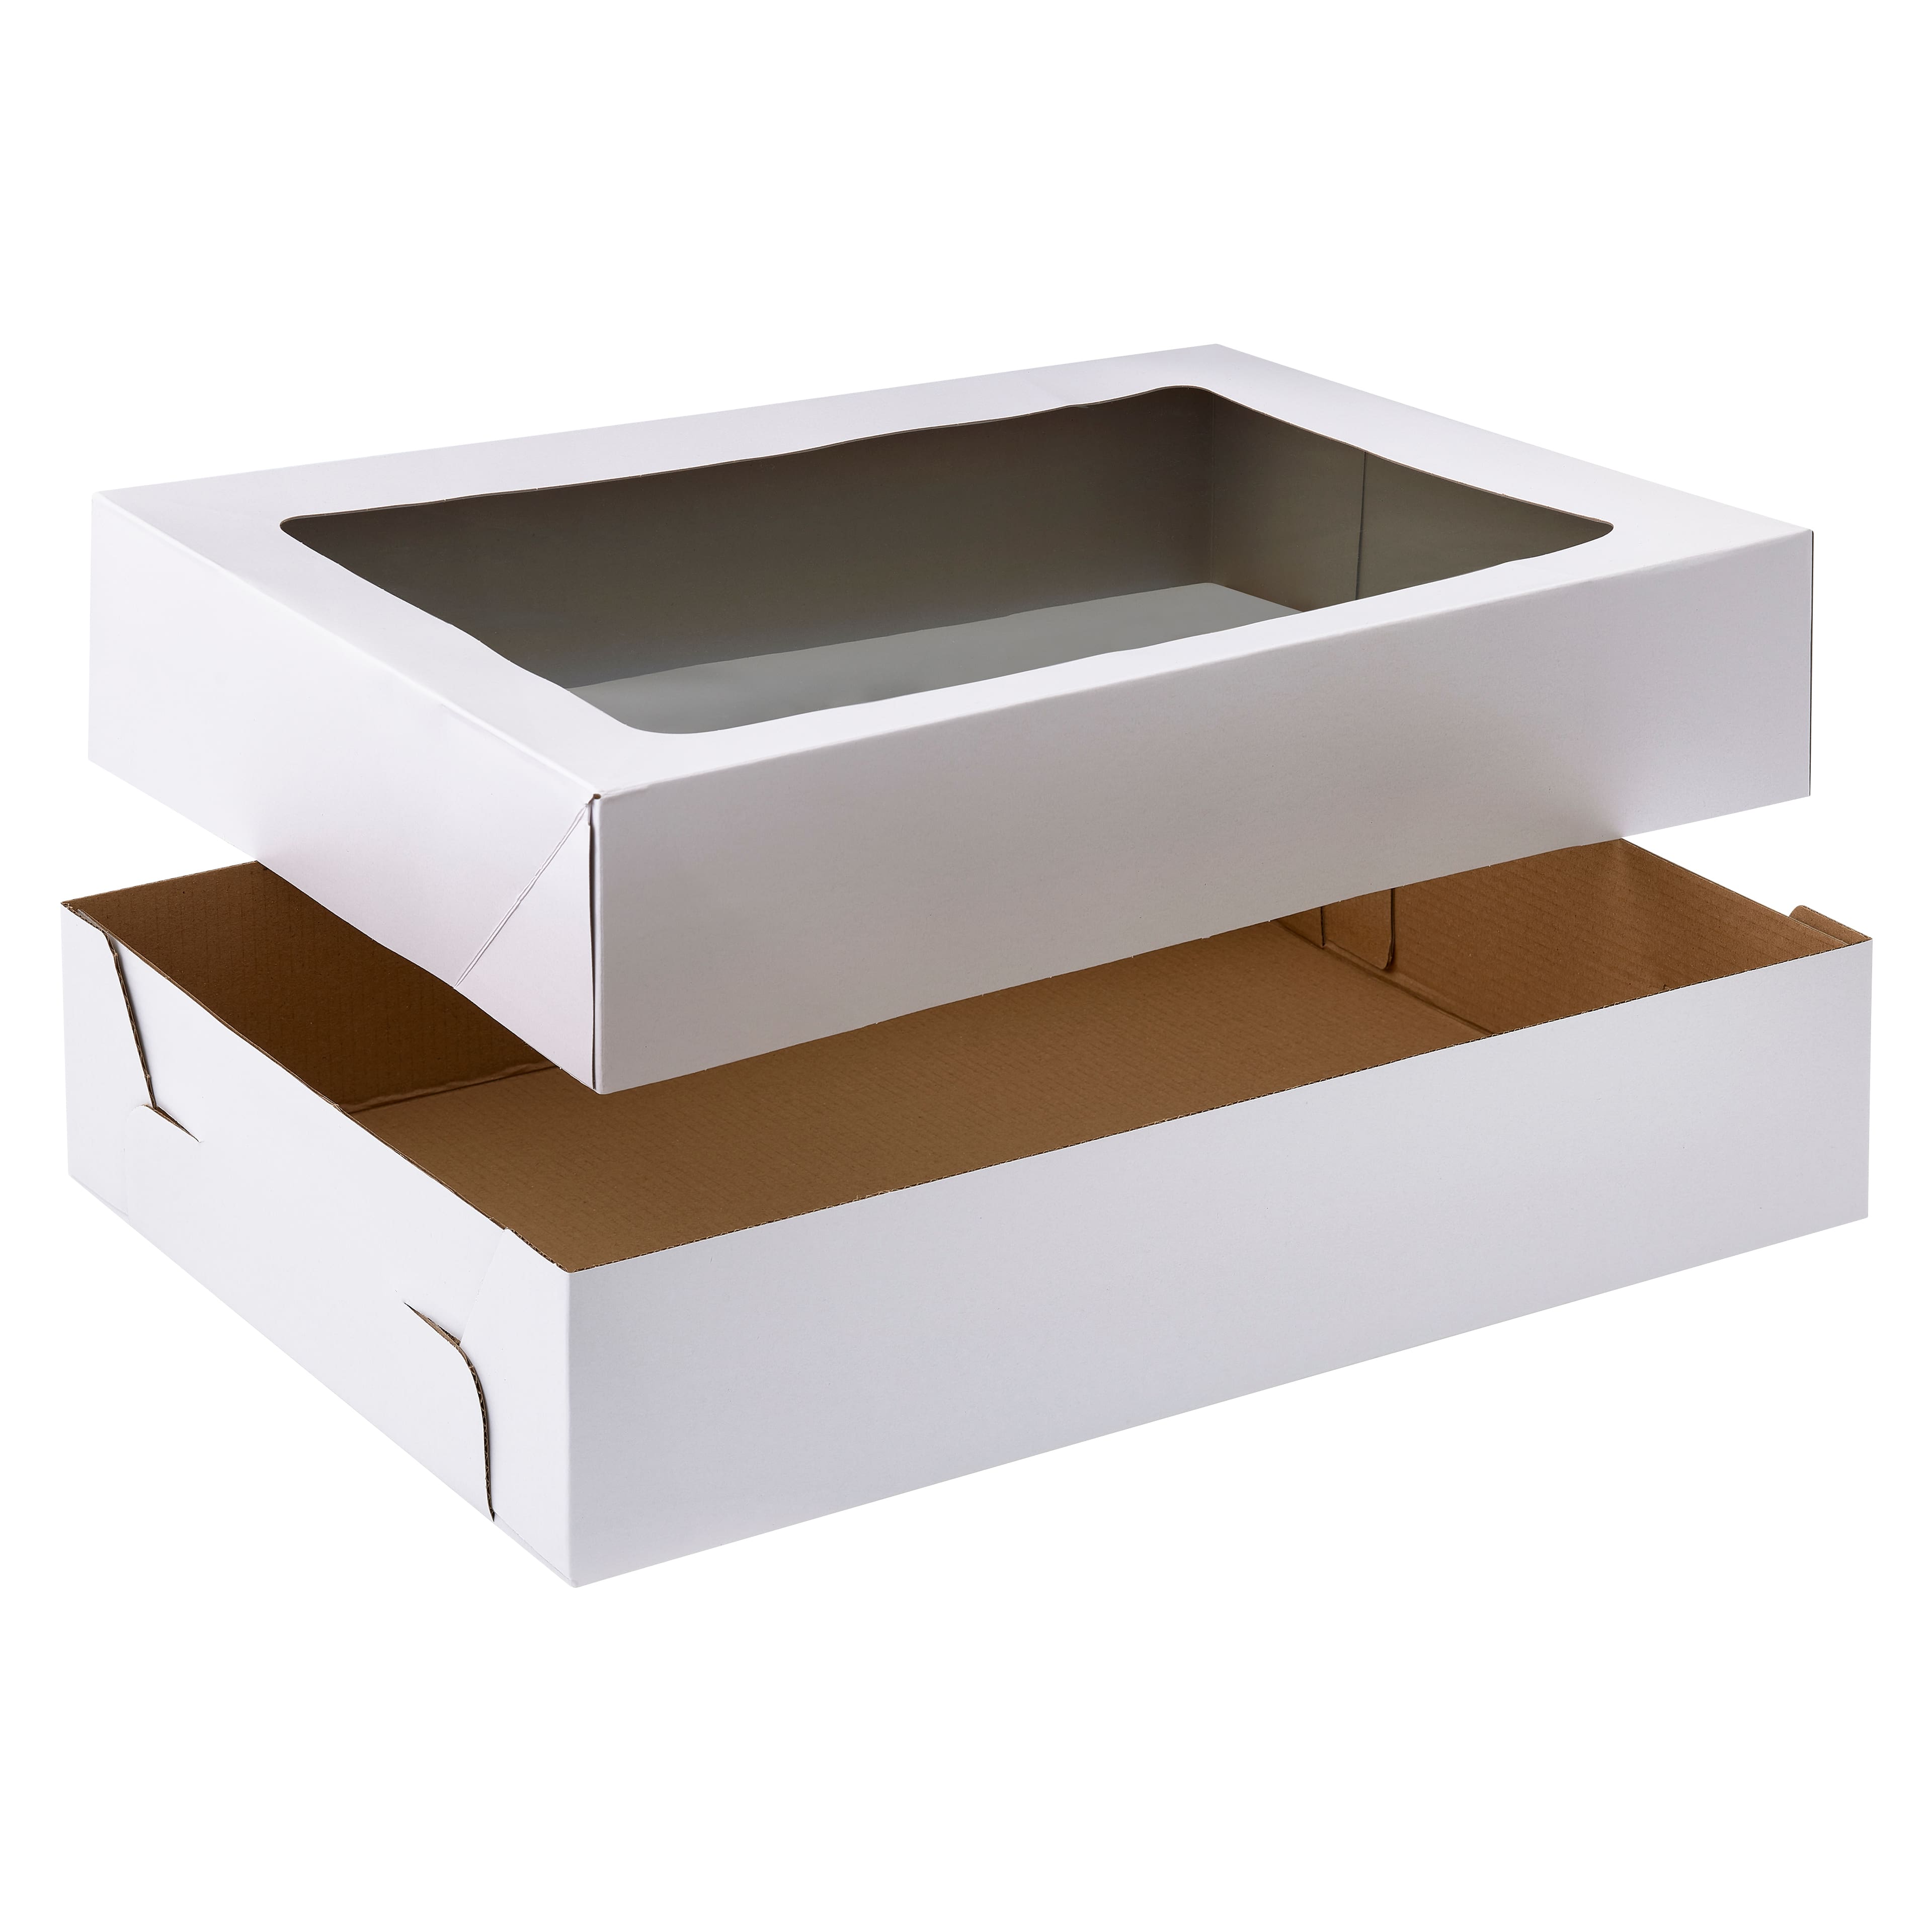 6 Packs: 2 ct. (12 total) Corrugated Window Cake Boxes by Celebrate It&#x2122;